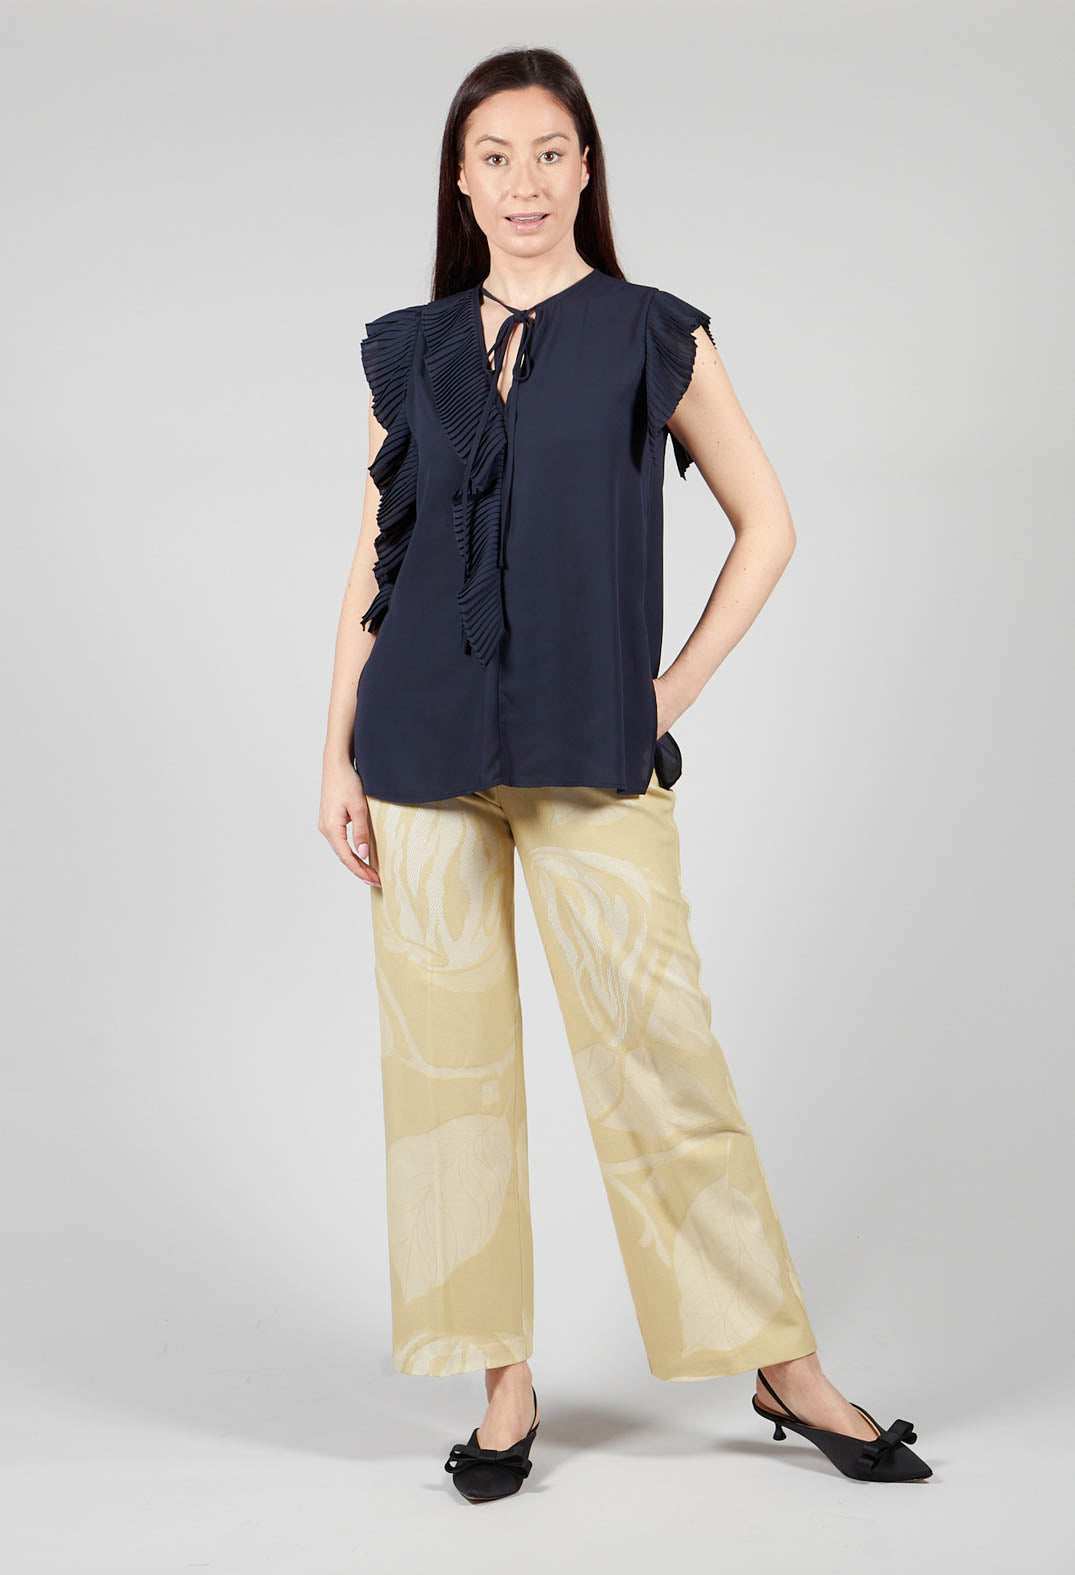 Top with Pleated Ruffles in Dark Blue